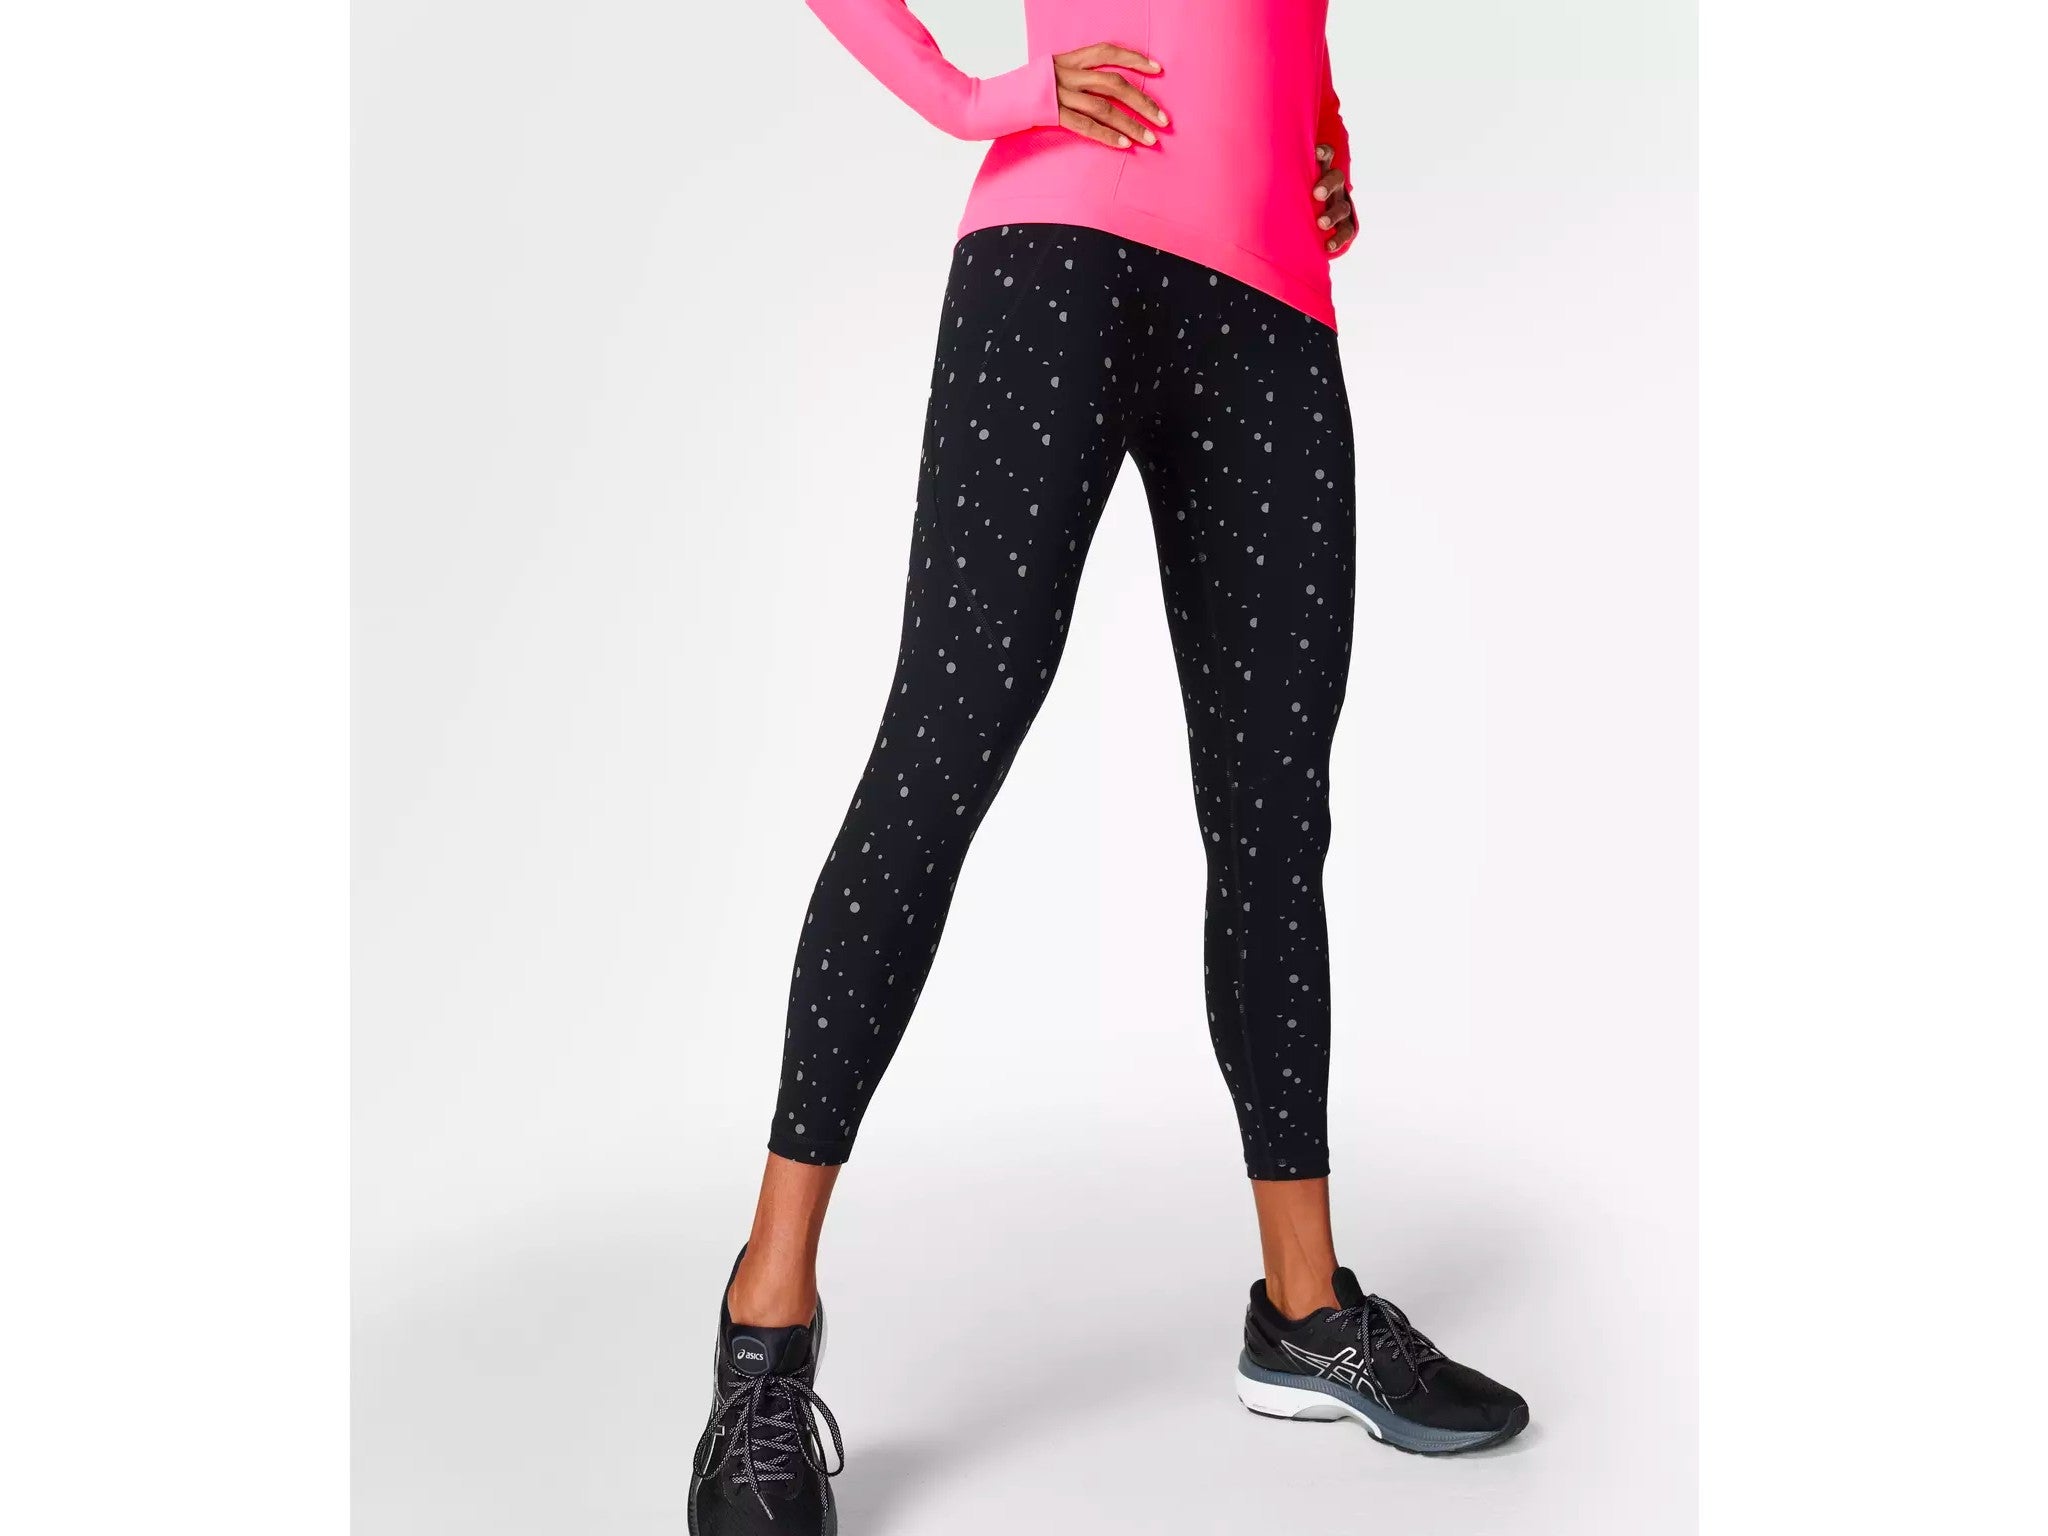 Sweaty Betty sale: to 50% off leggings, backpacks more | The Independent